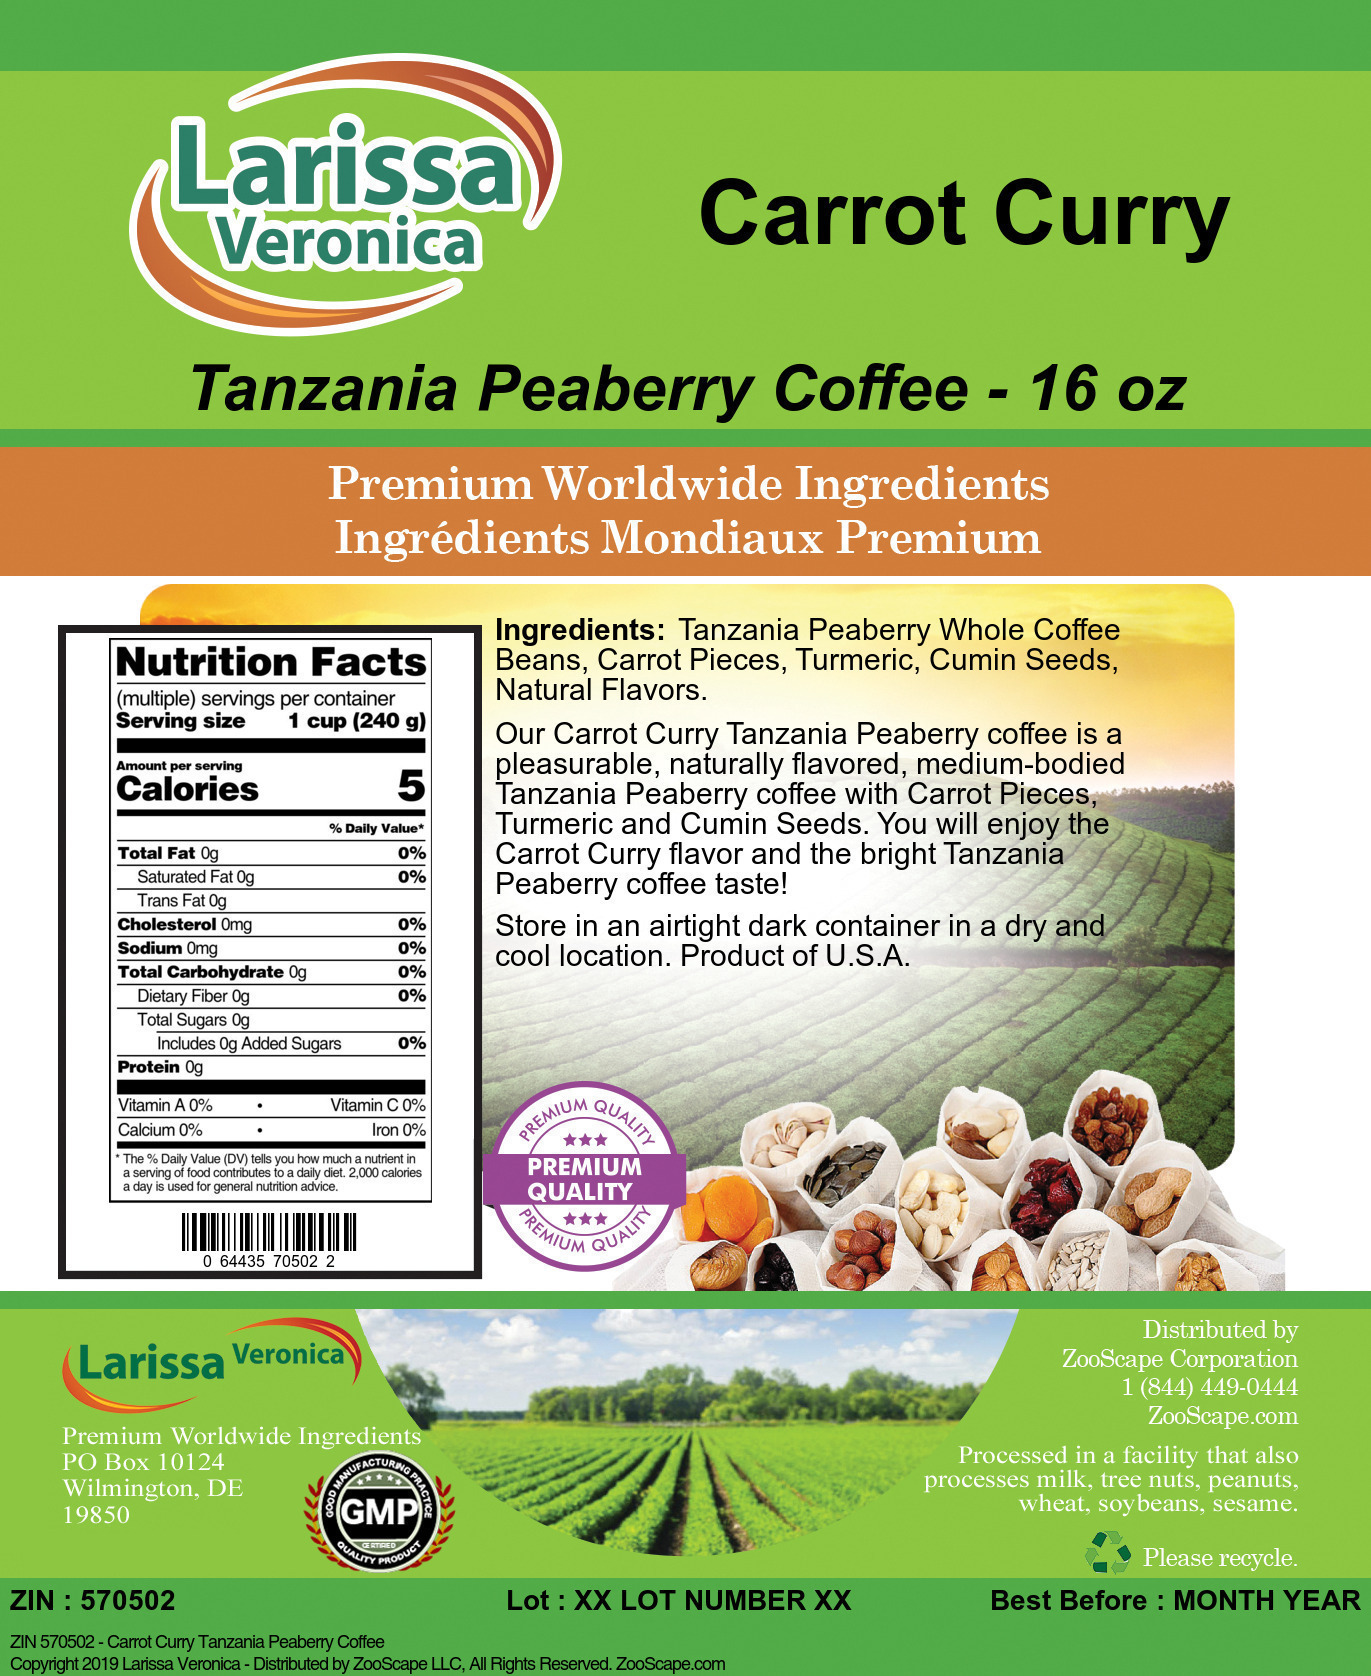 Carrot Curry Tanzania Peaberry Coffee - Label